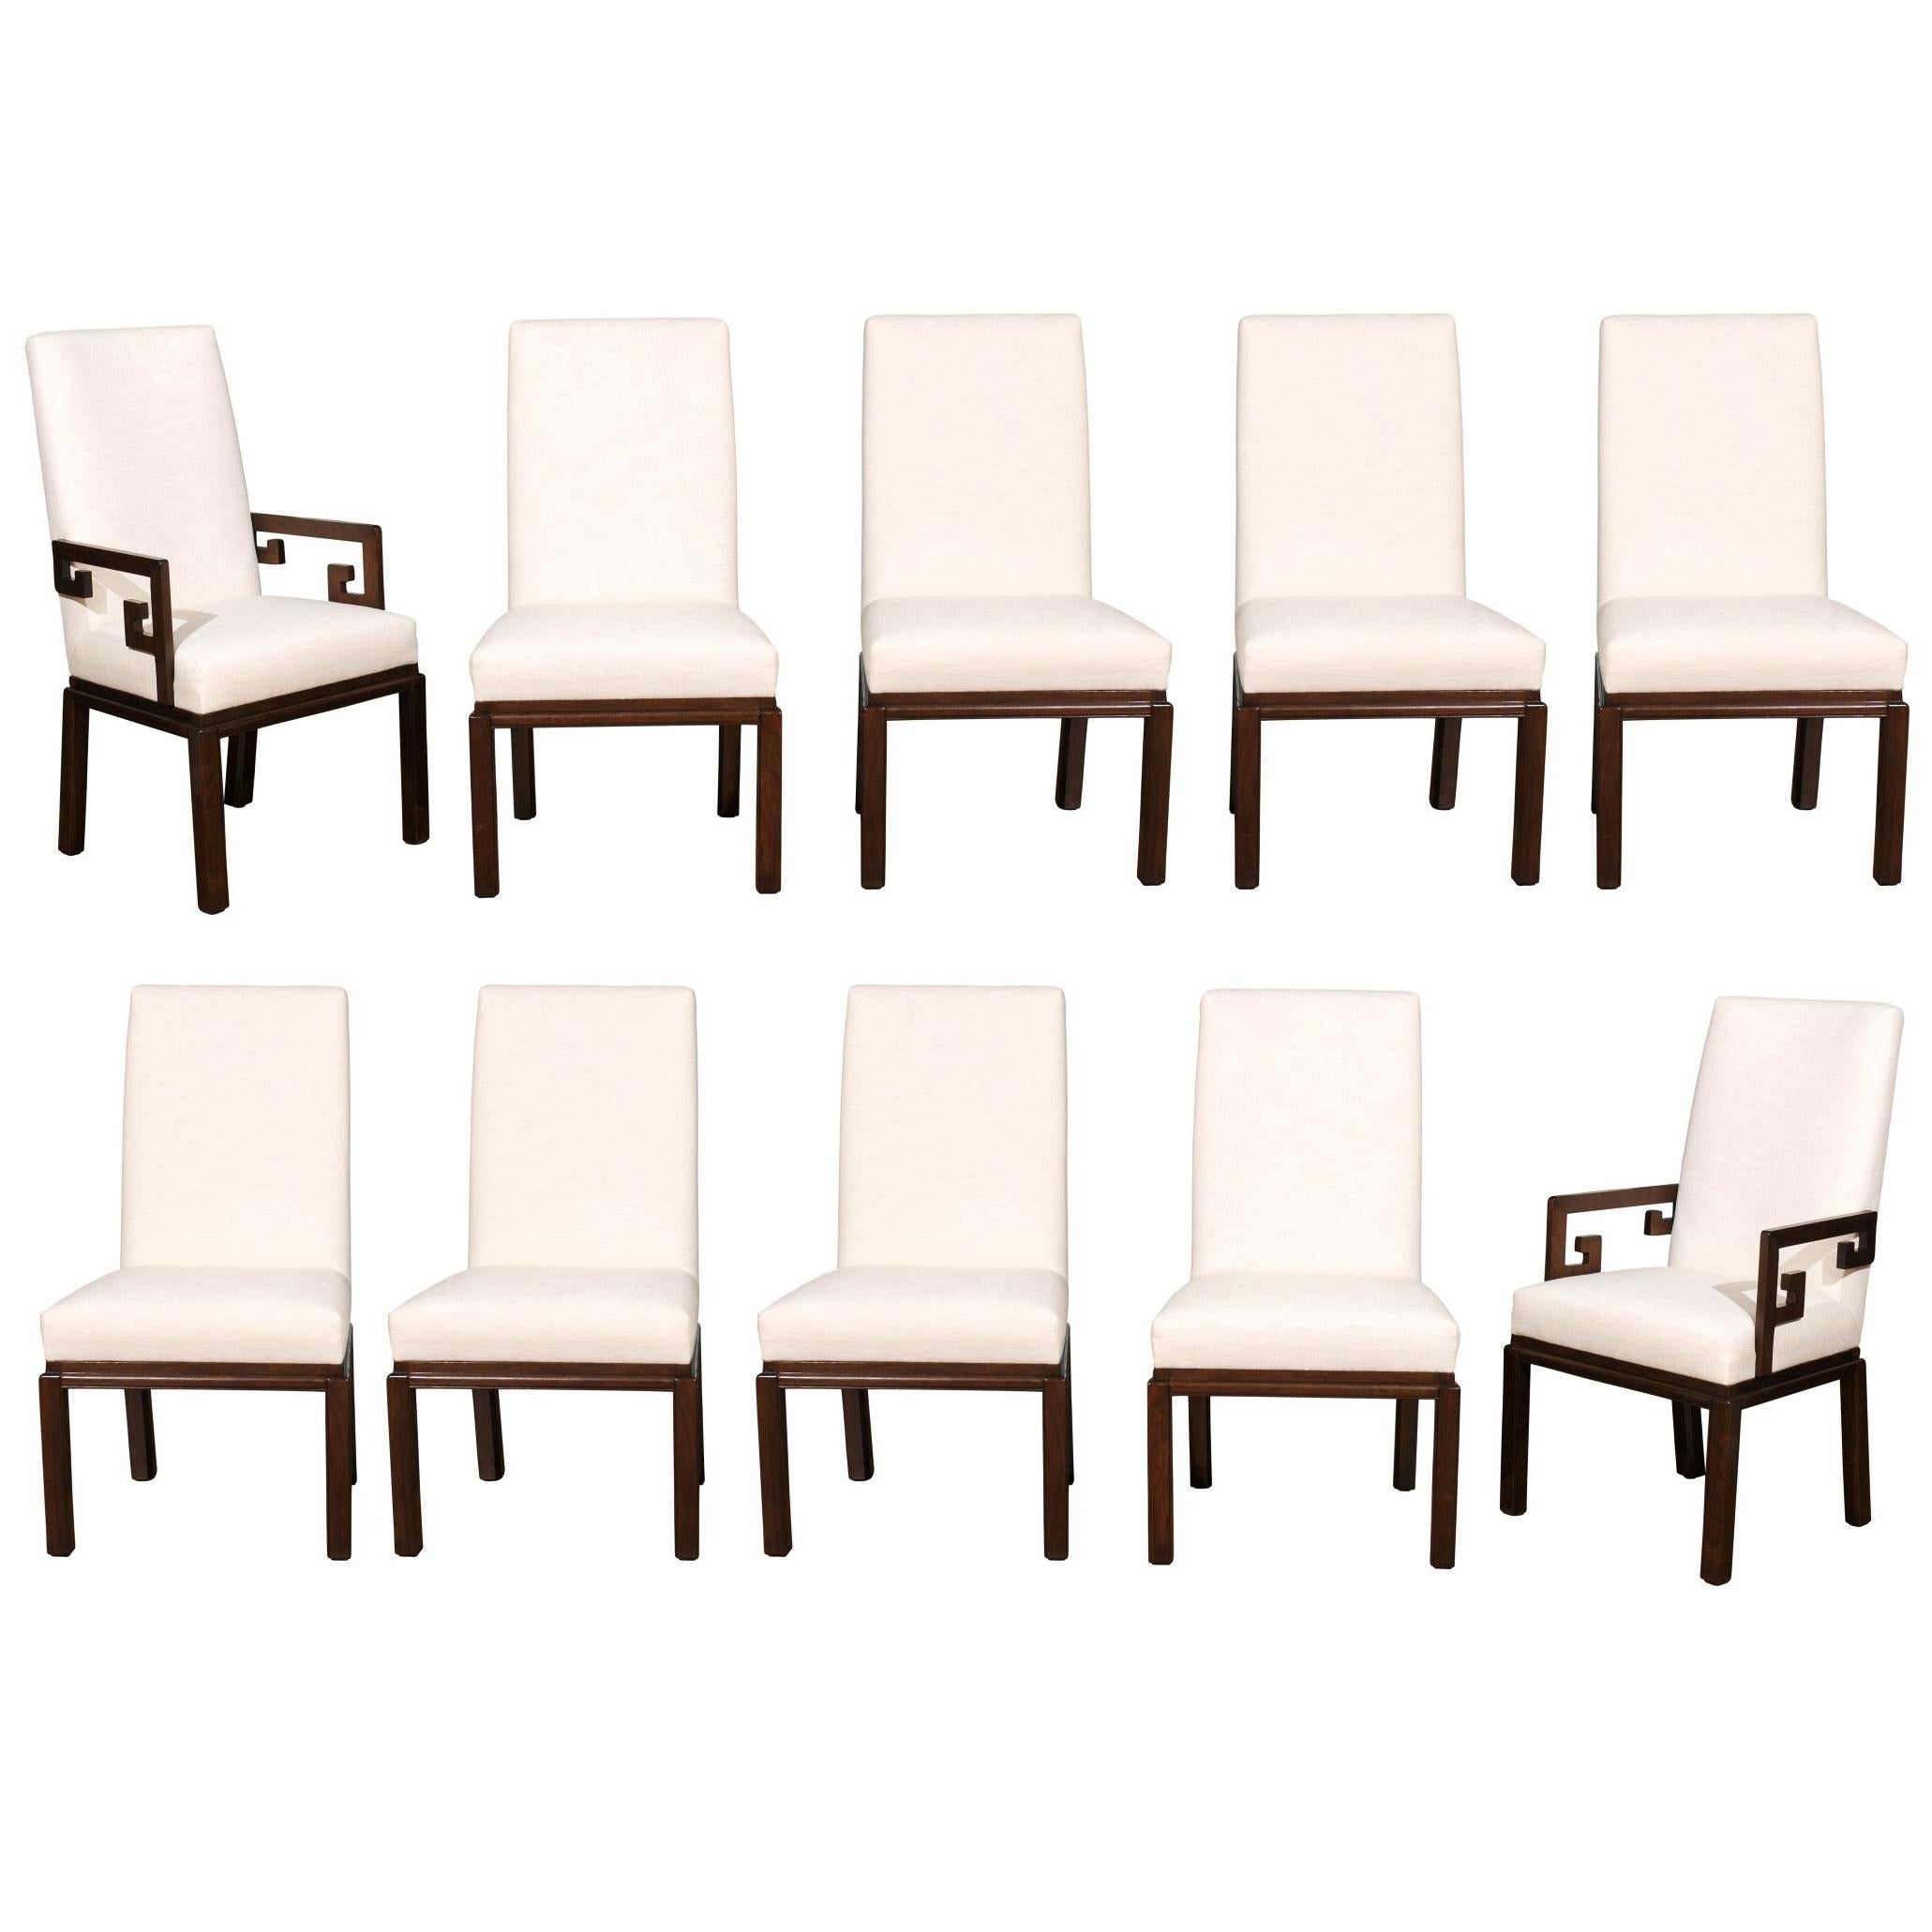 Elegant Restored Set of 10 Parsons Style Dining Chairs by Baker, Circa 1970 For Sale